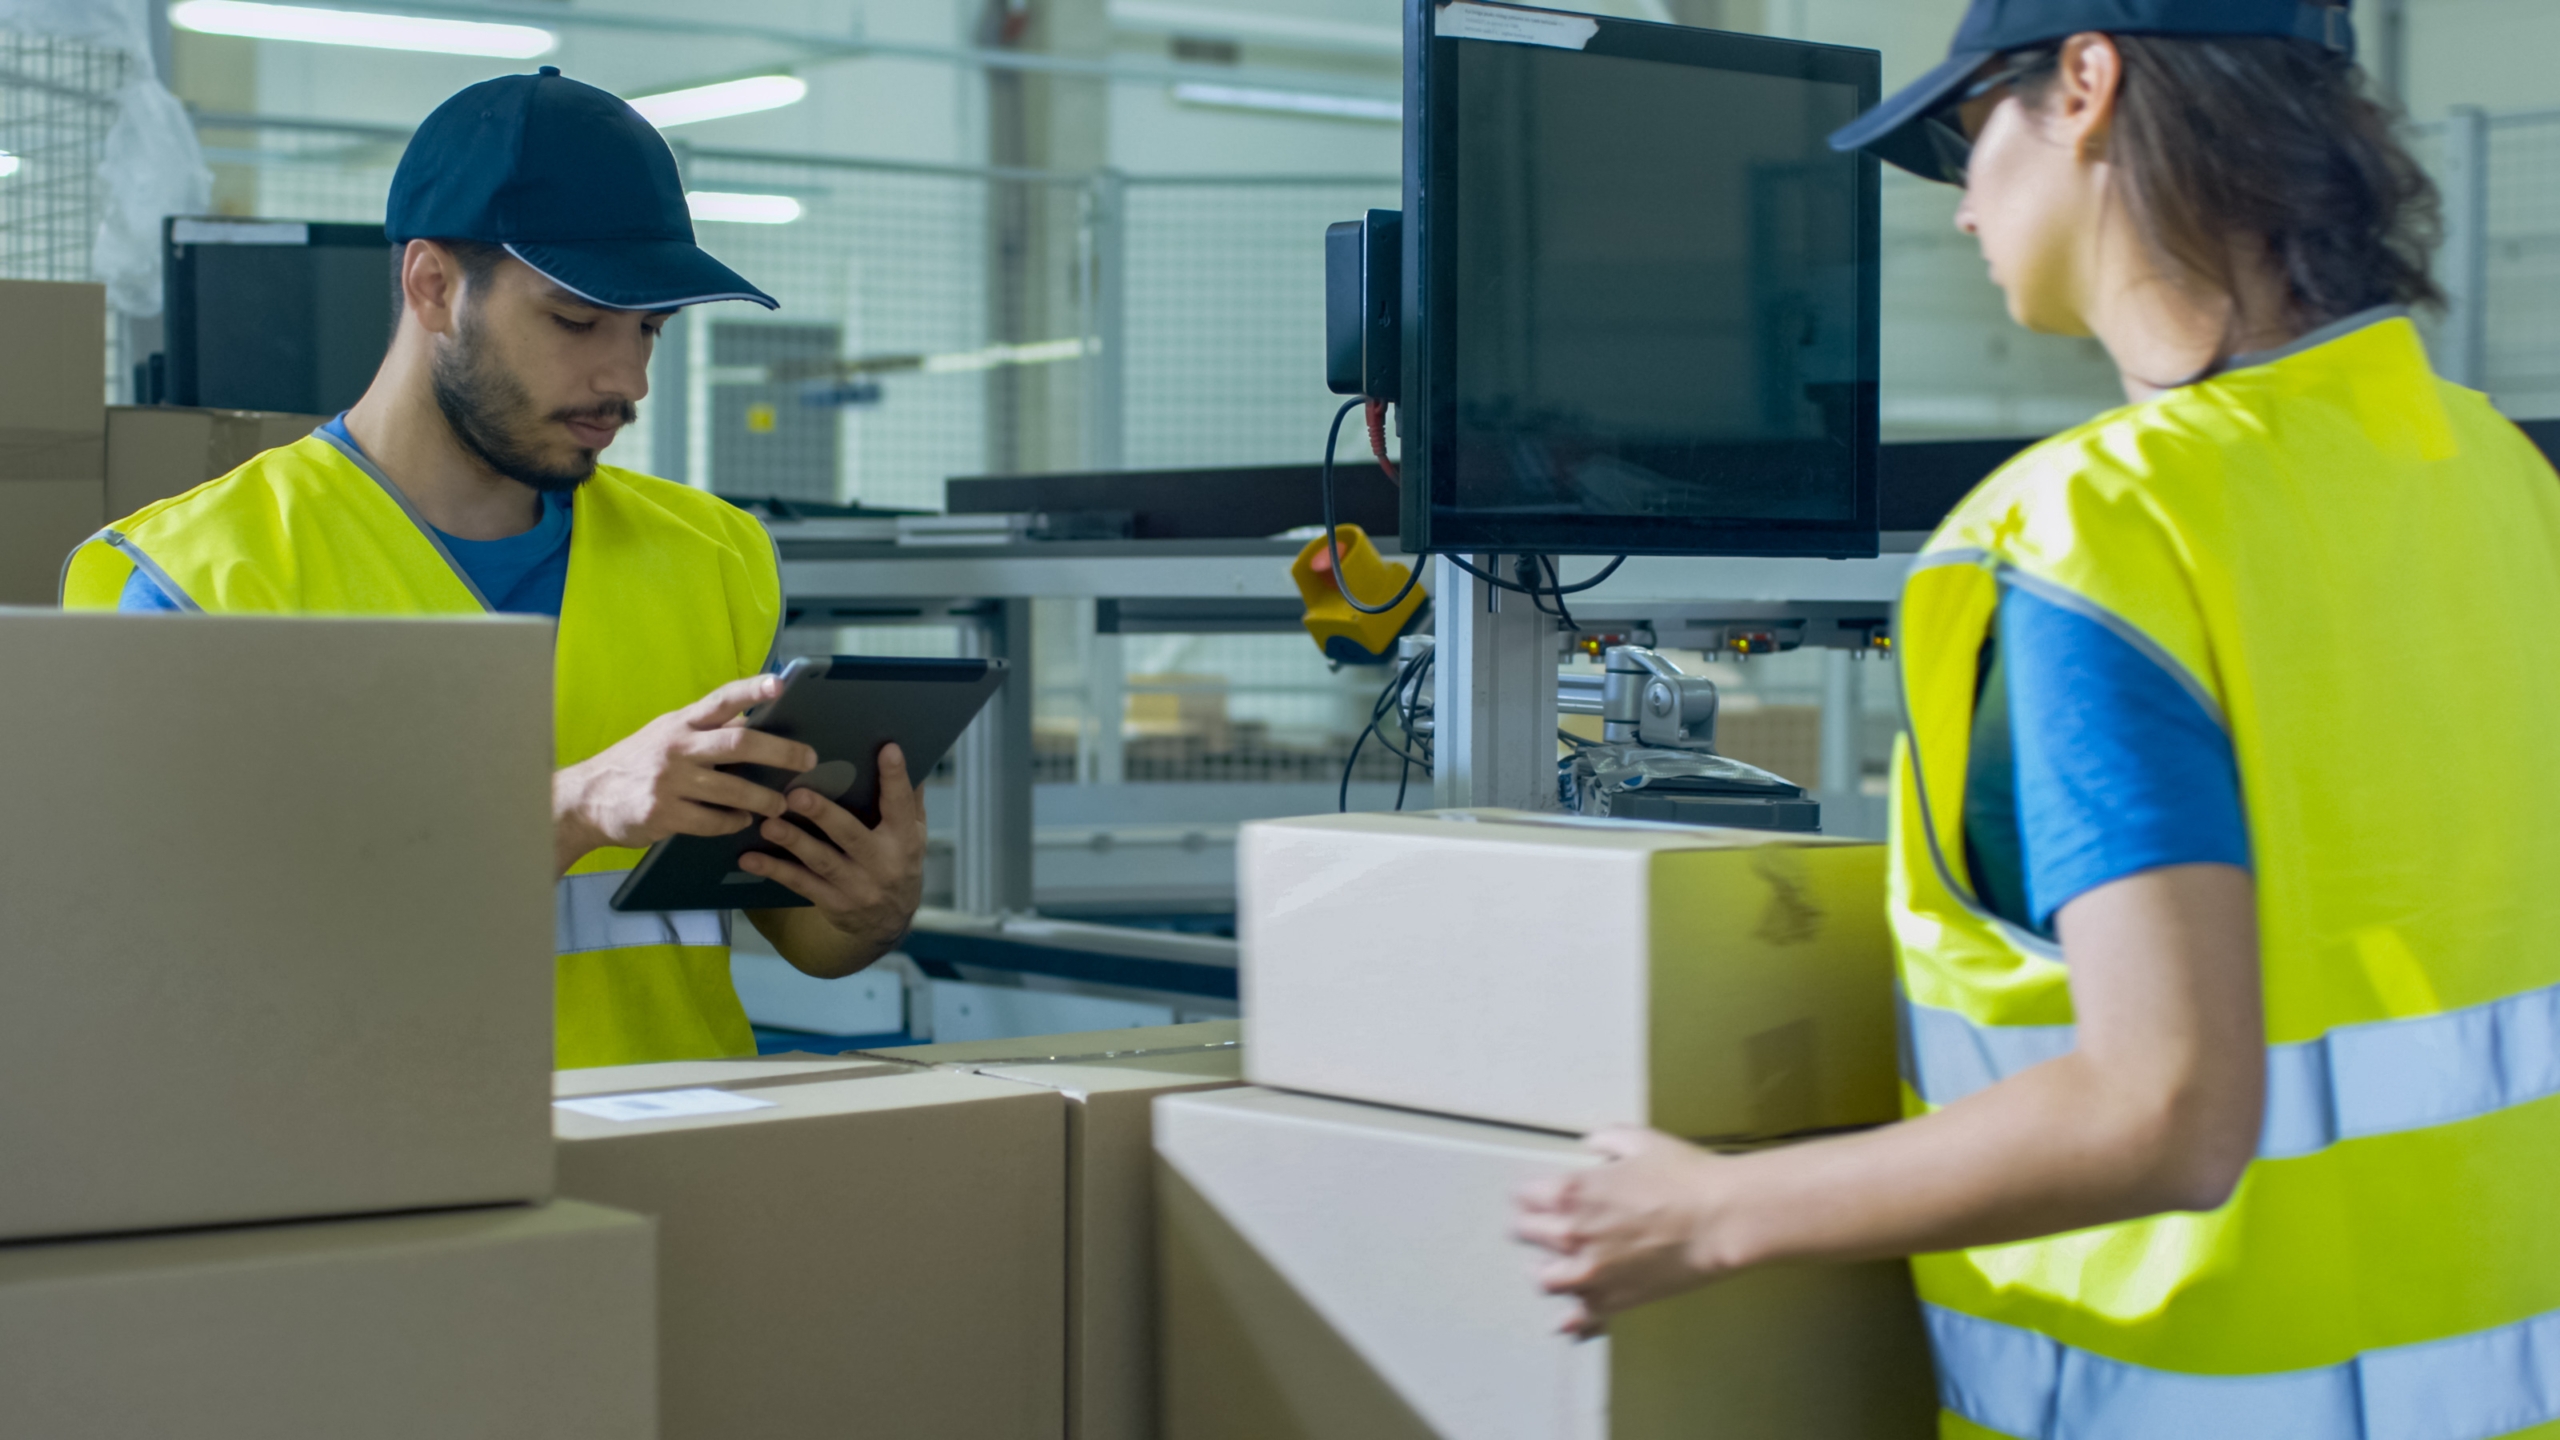 Employees wearing bright green safety vests handle large cardboard boxes, using a computer and a handheld device. 